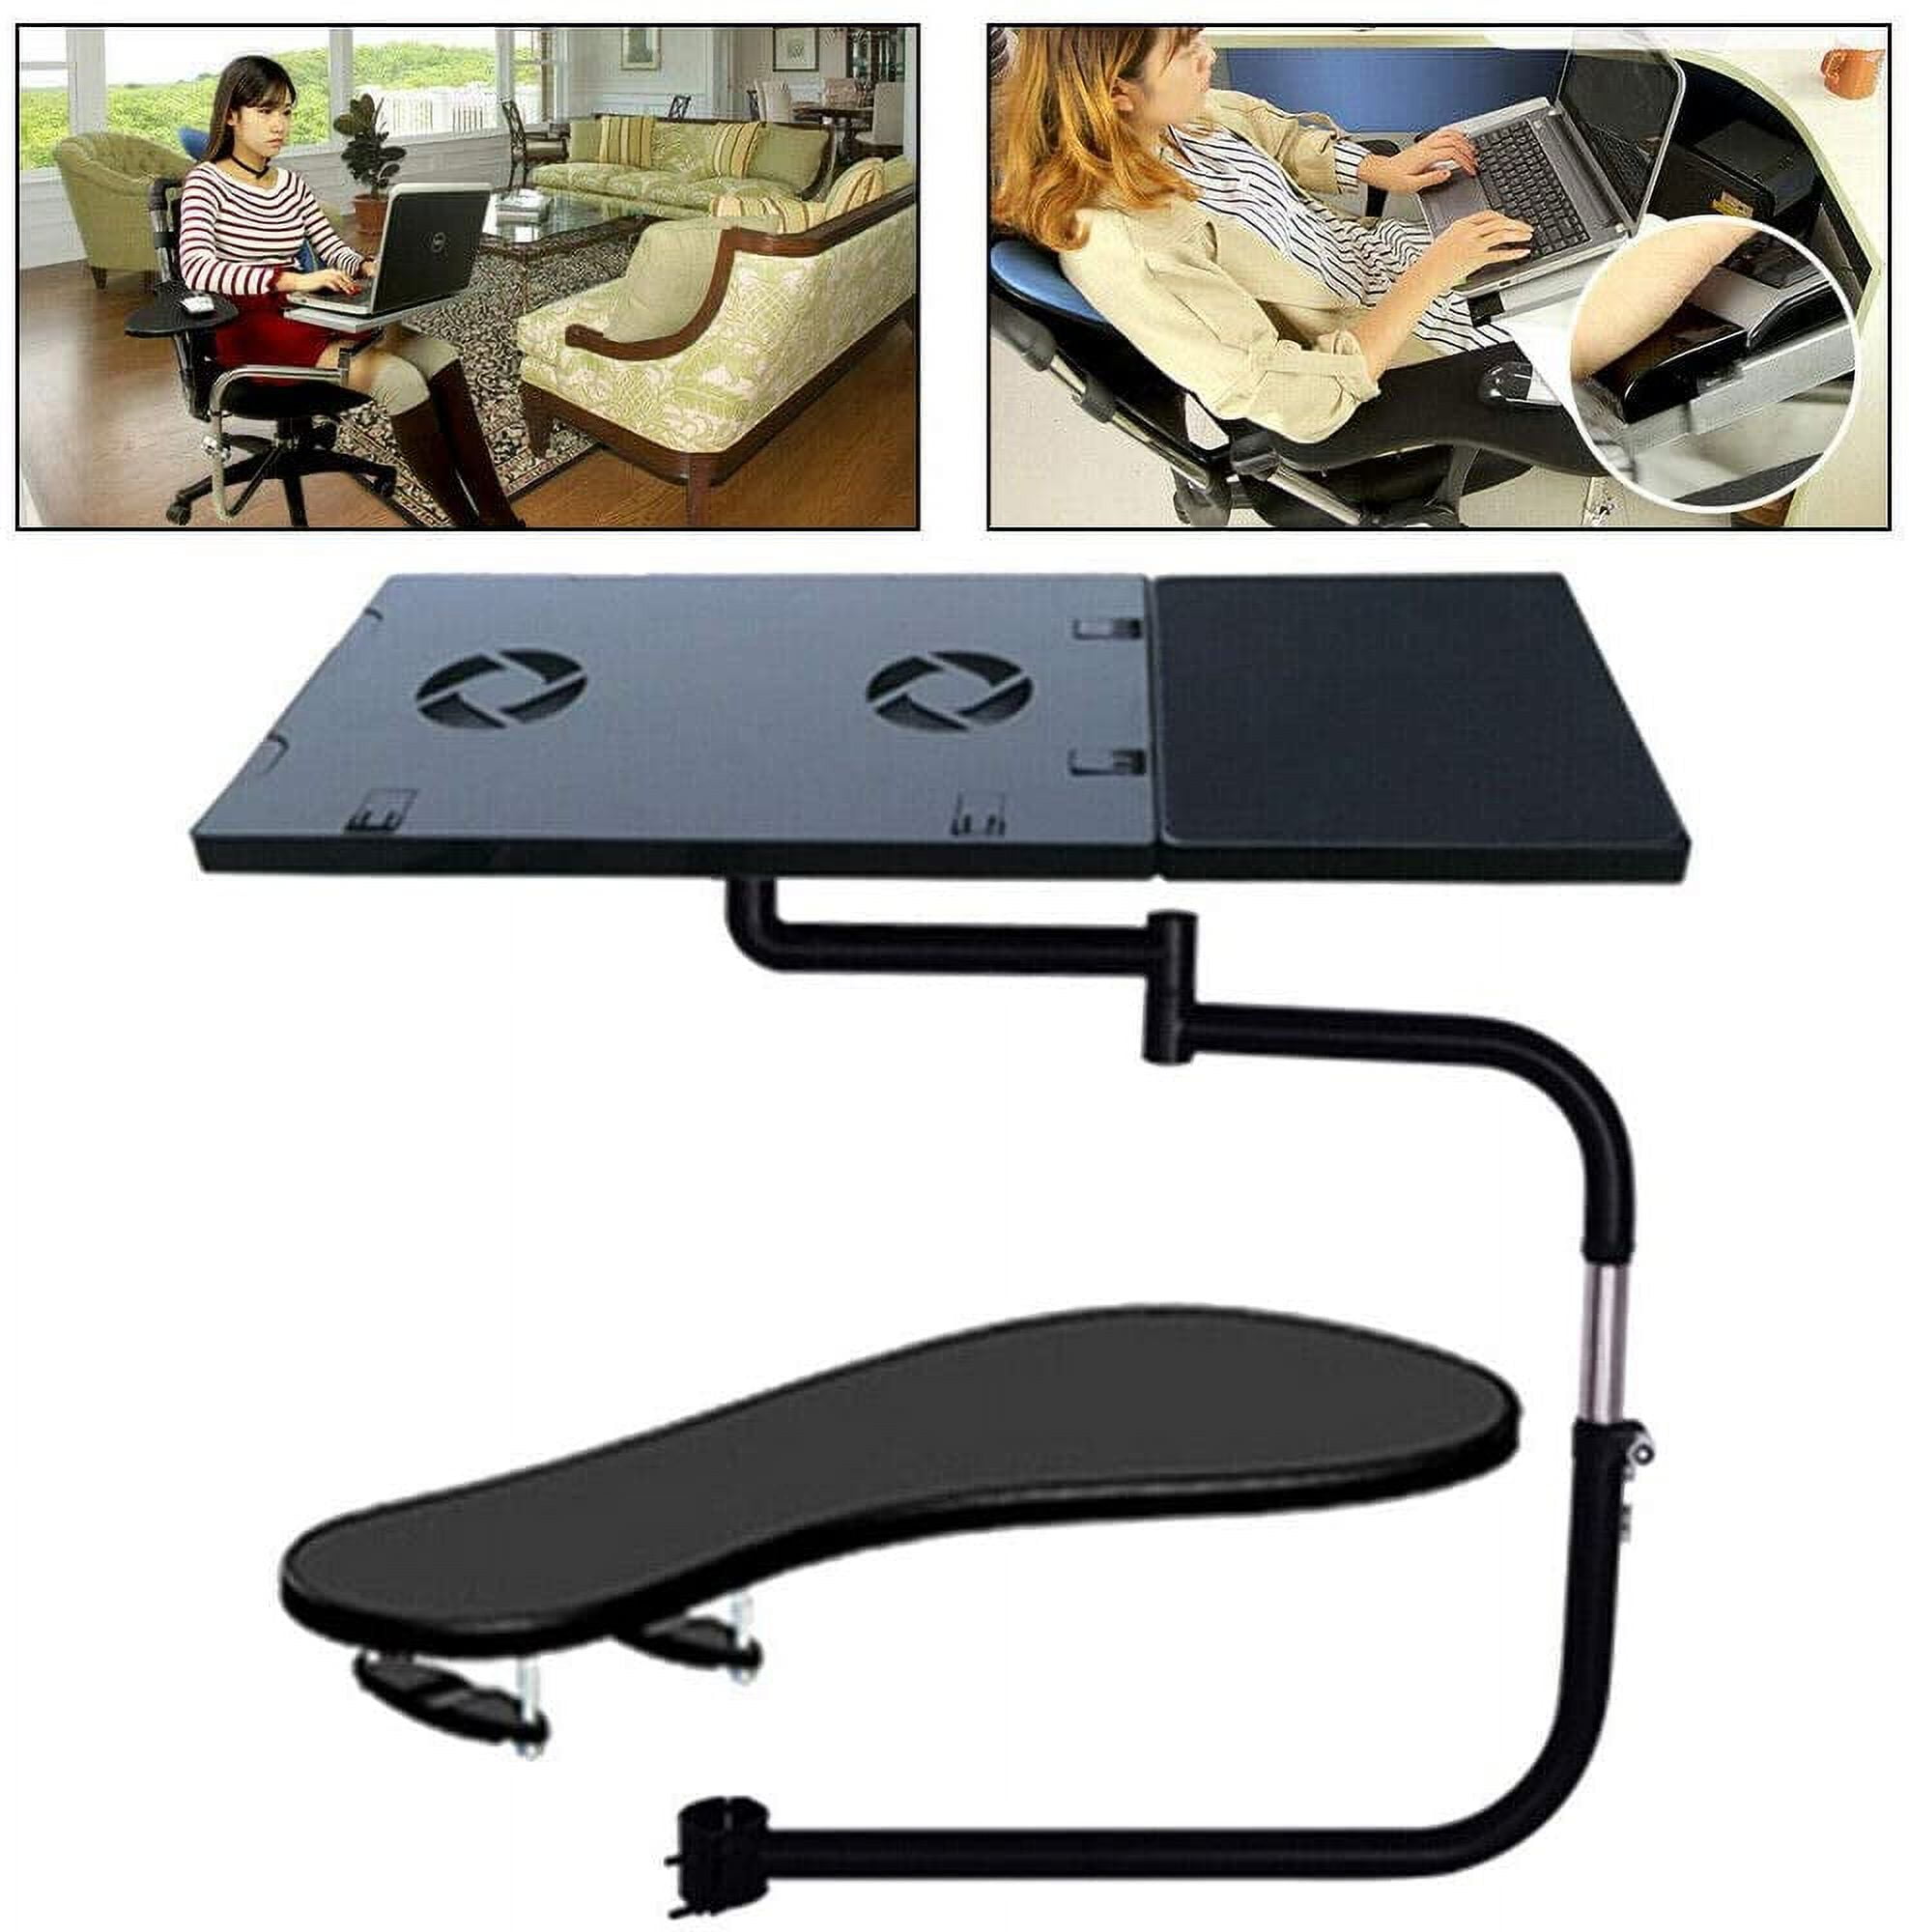  Keyboard Tray, Creative Laptop Bracket Keyboard Mouse Pad  Bracket Lift Swivel Chair/Computer Chair/Boss Chair Multifunctional  Comfortable Ergonomic Adjustable,White : Office Products